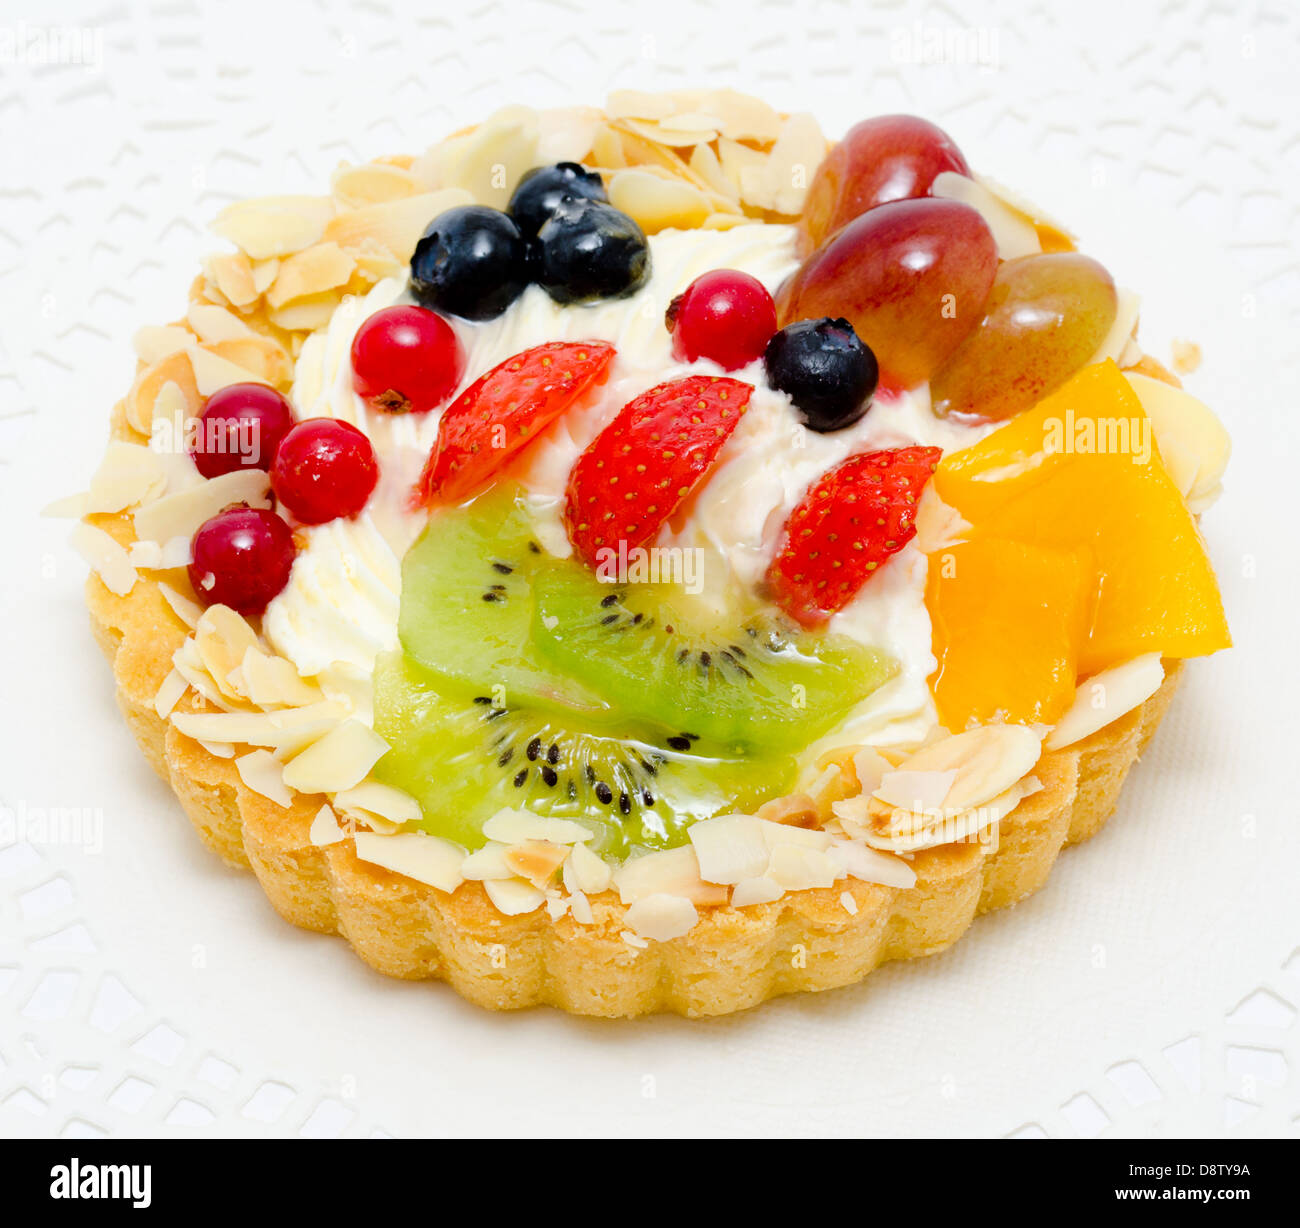 cake with fruit and berries Stock Photo